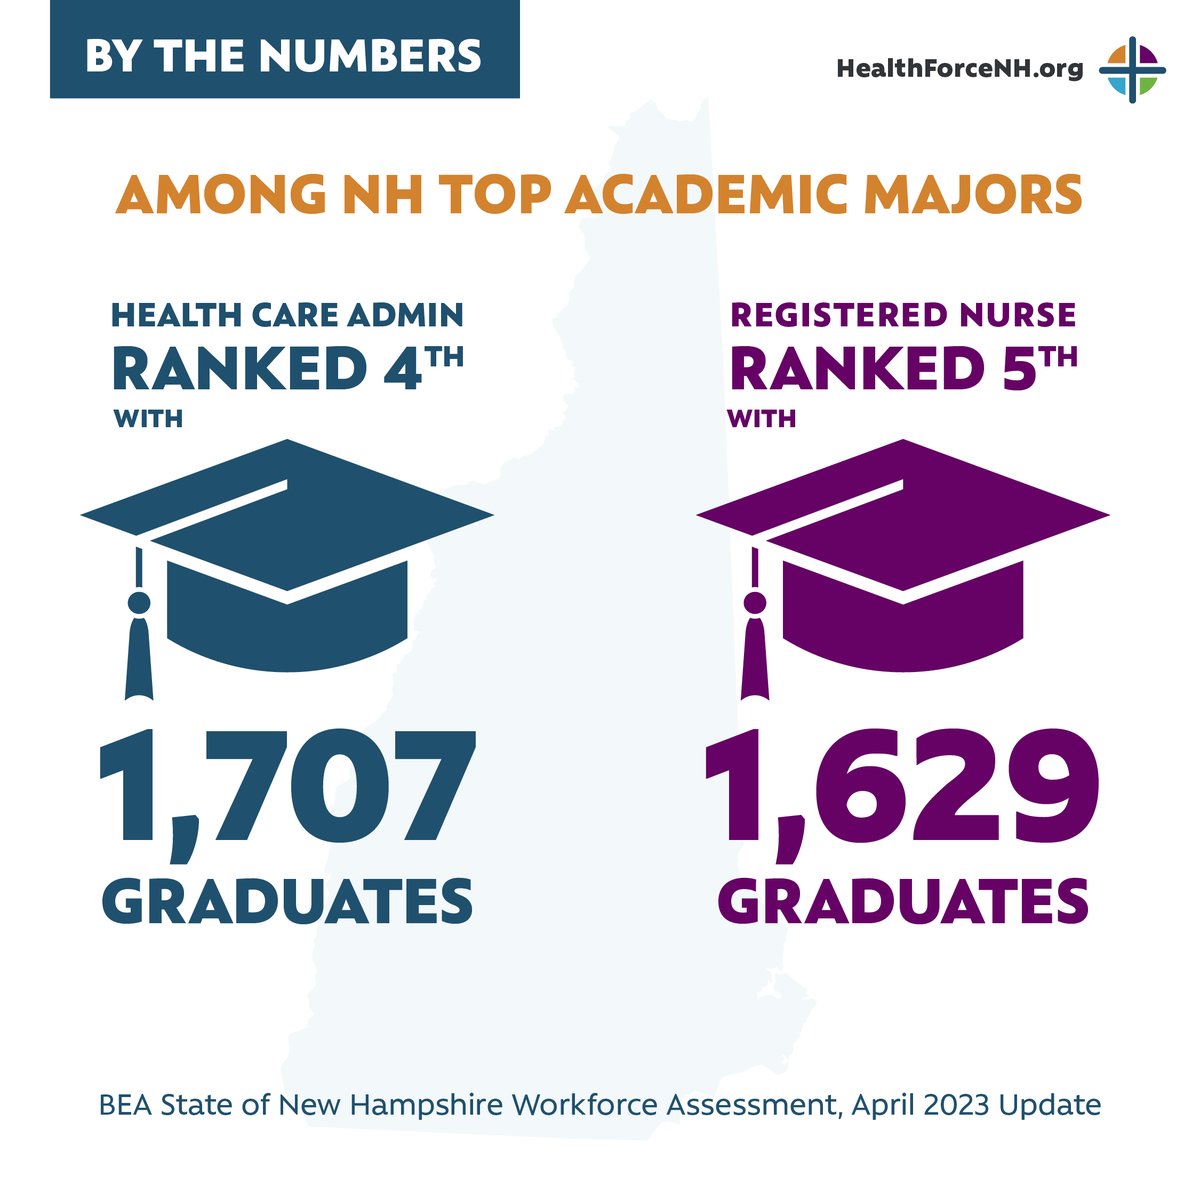 Higher education plays a huge role in the health care workforce, and careers in the field are among the leading majors for colleges and universities in New Hampshire. Despite these numbers, NH still faces a workforce shortage. @NHEconomy#

#HealthForceNH #NHeconomy #healthcare